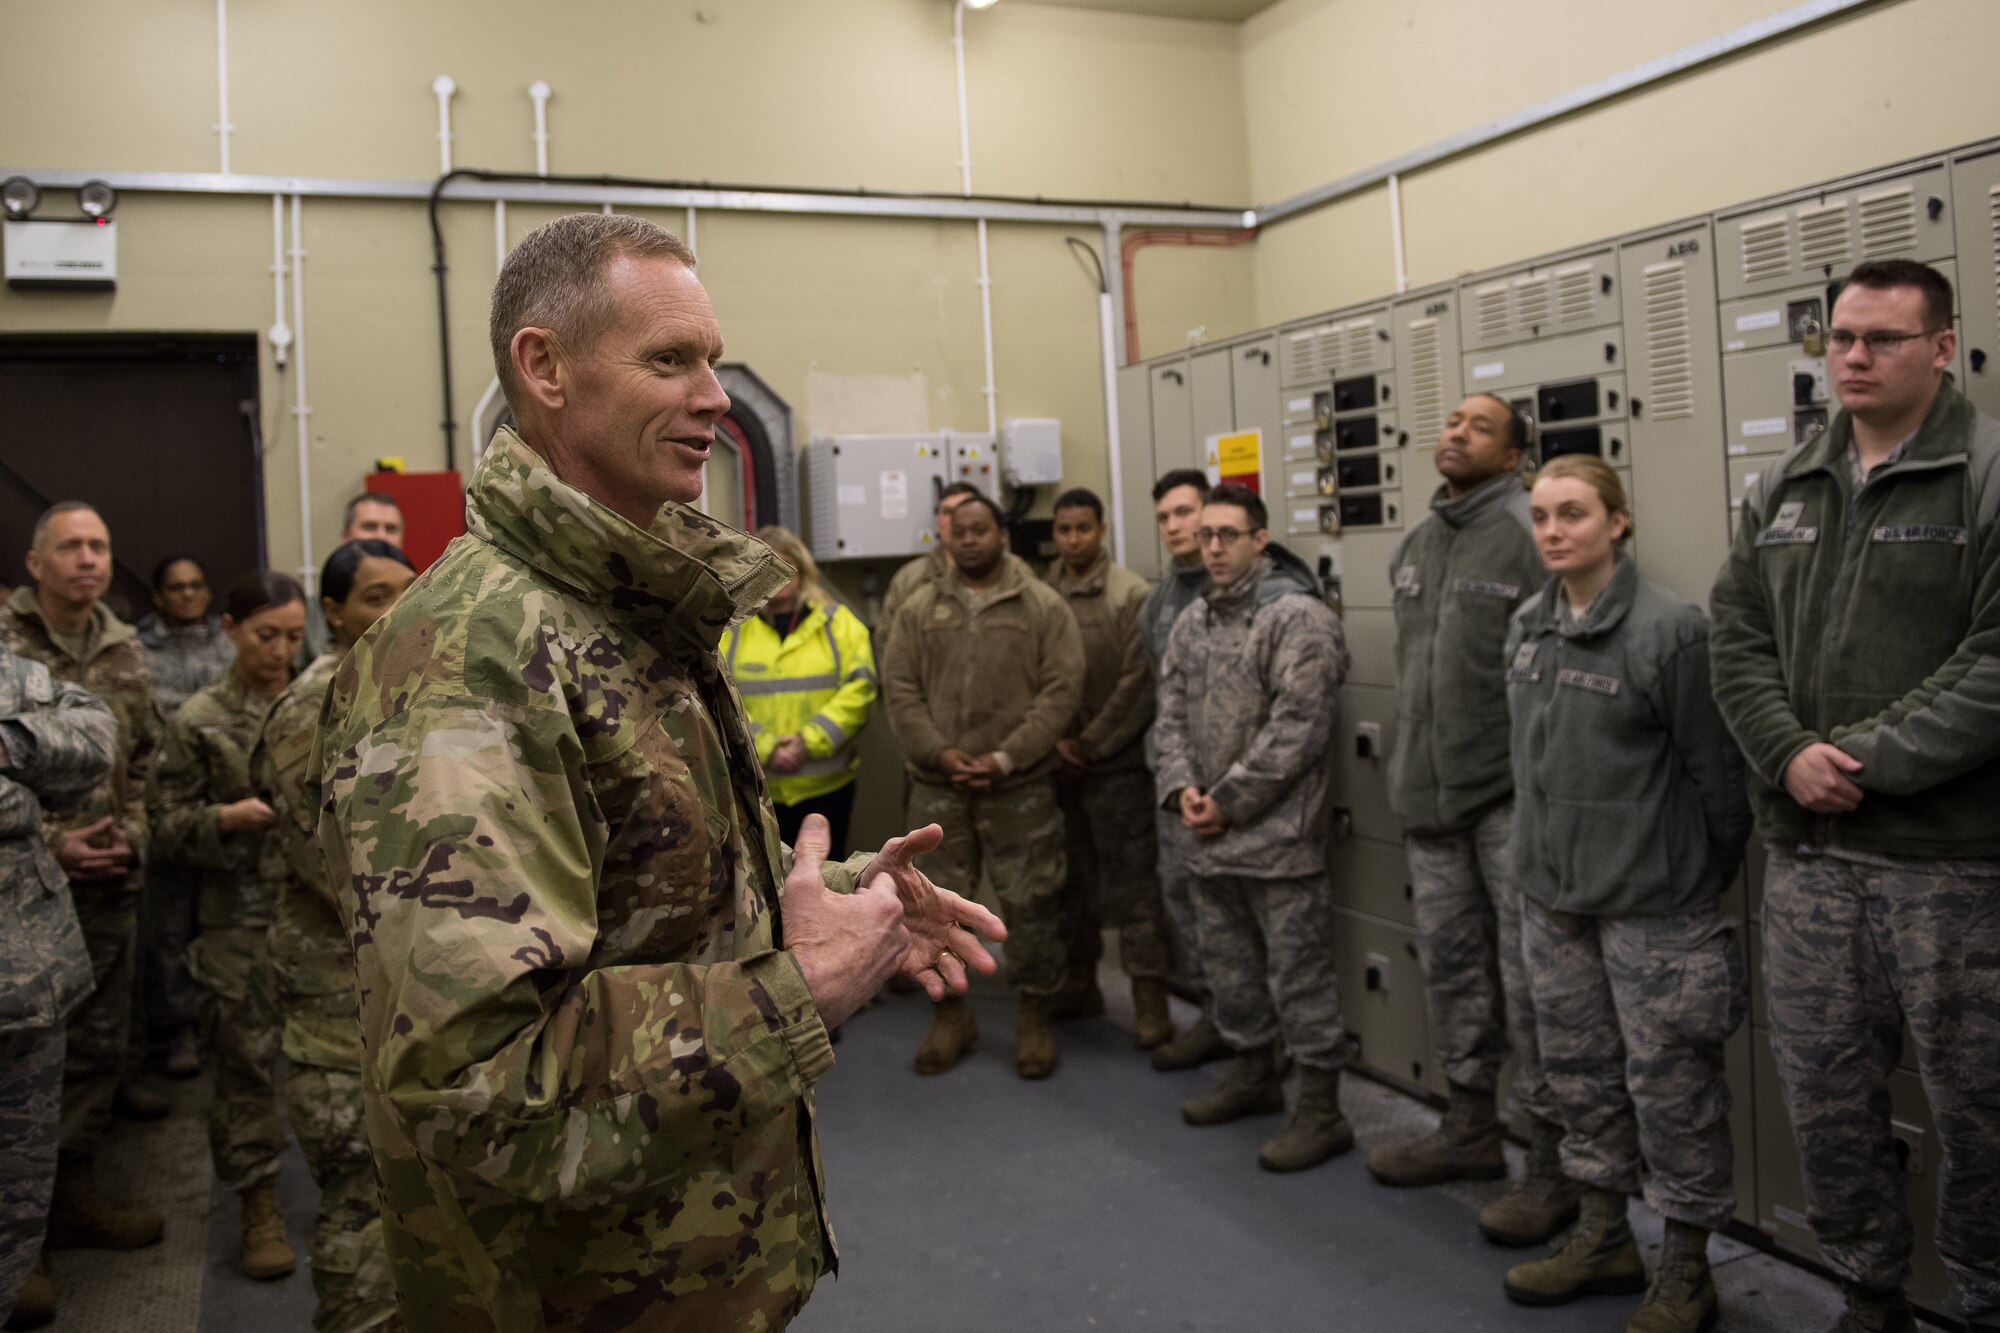 Maj. Gen. James Dawkins Jr., Eighth Air Force and Joint-Global Strike Operations Center commander, speaks with members of the Bomber Task Force logistics readiness team at RAF Fairford, England, April 4, 2019. Dawkins visited different sections of the base during U.S. Strategic Command’s Bomber Task Force in Europe to talk to Airmen and address any questions they had. (U.S. Air Force photo by Airman 1st Class Tessa B. Corrick)